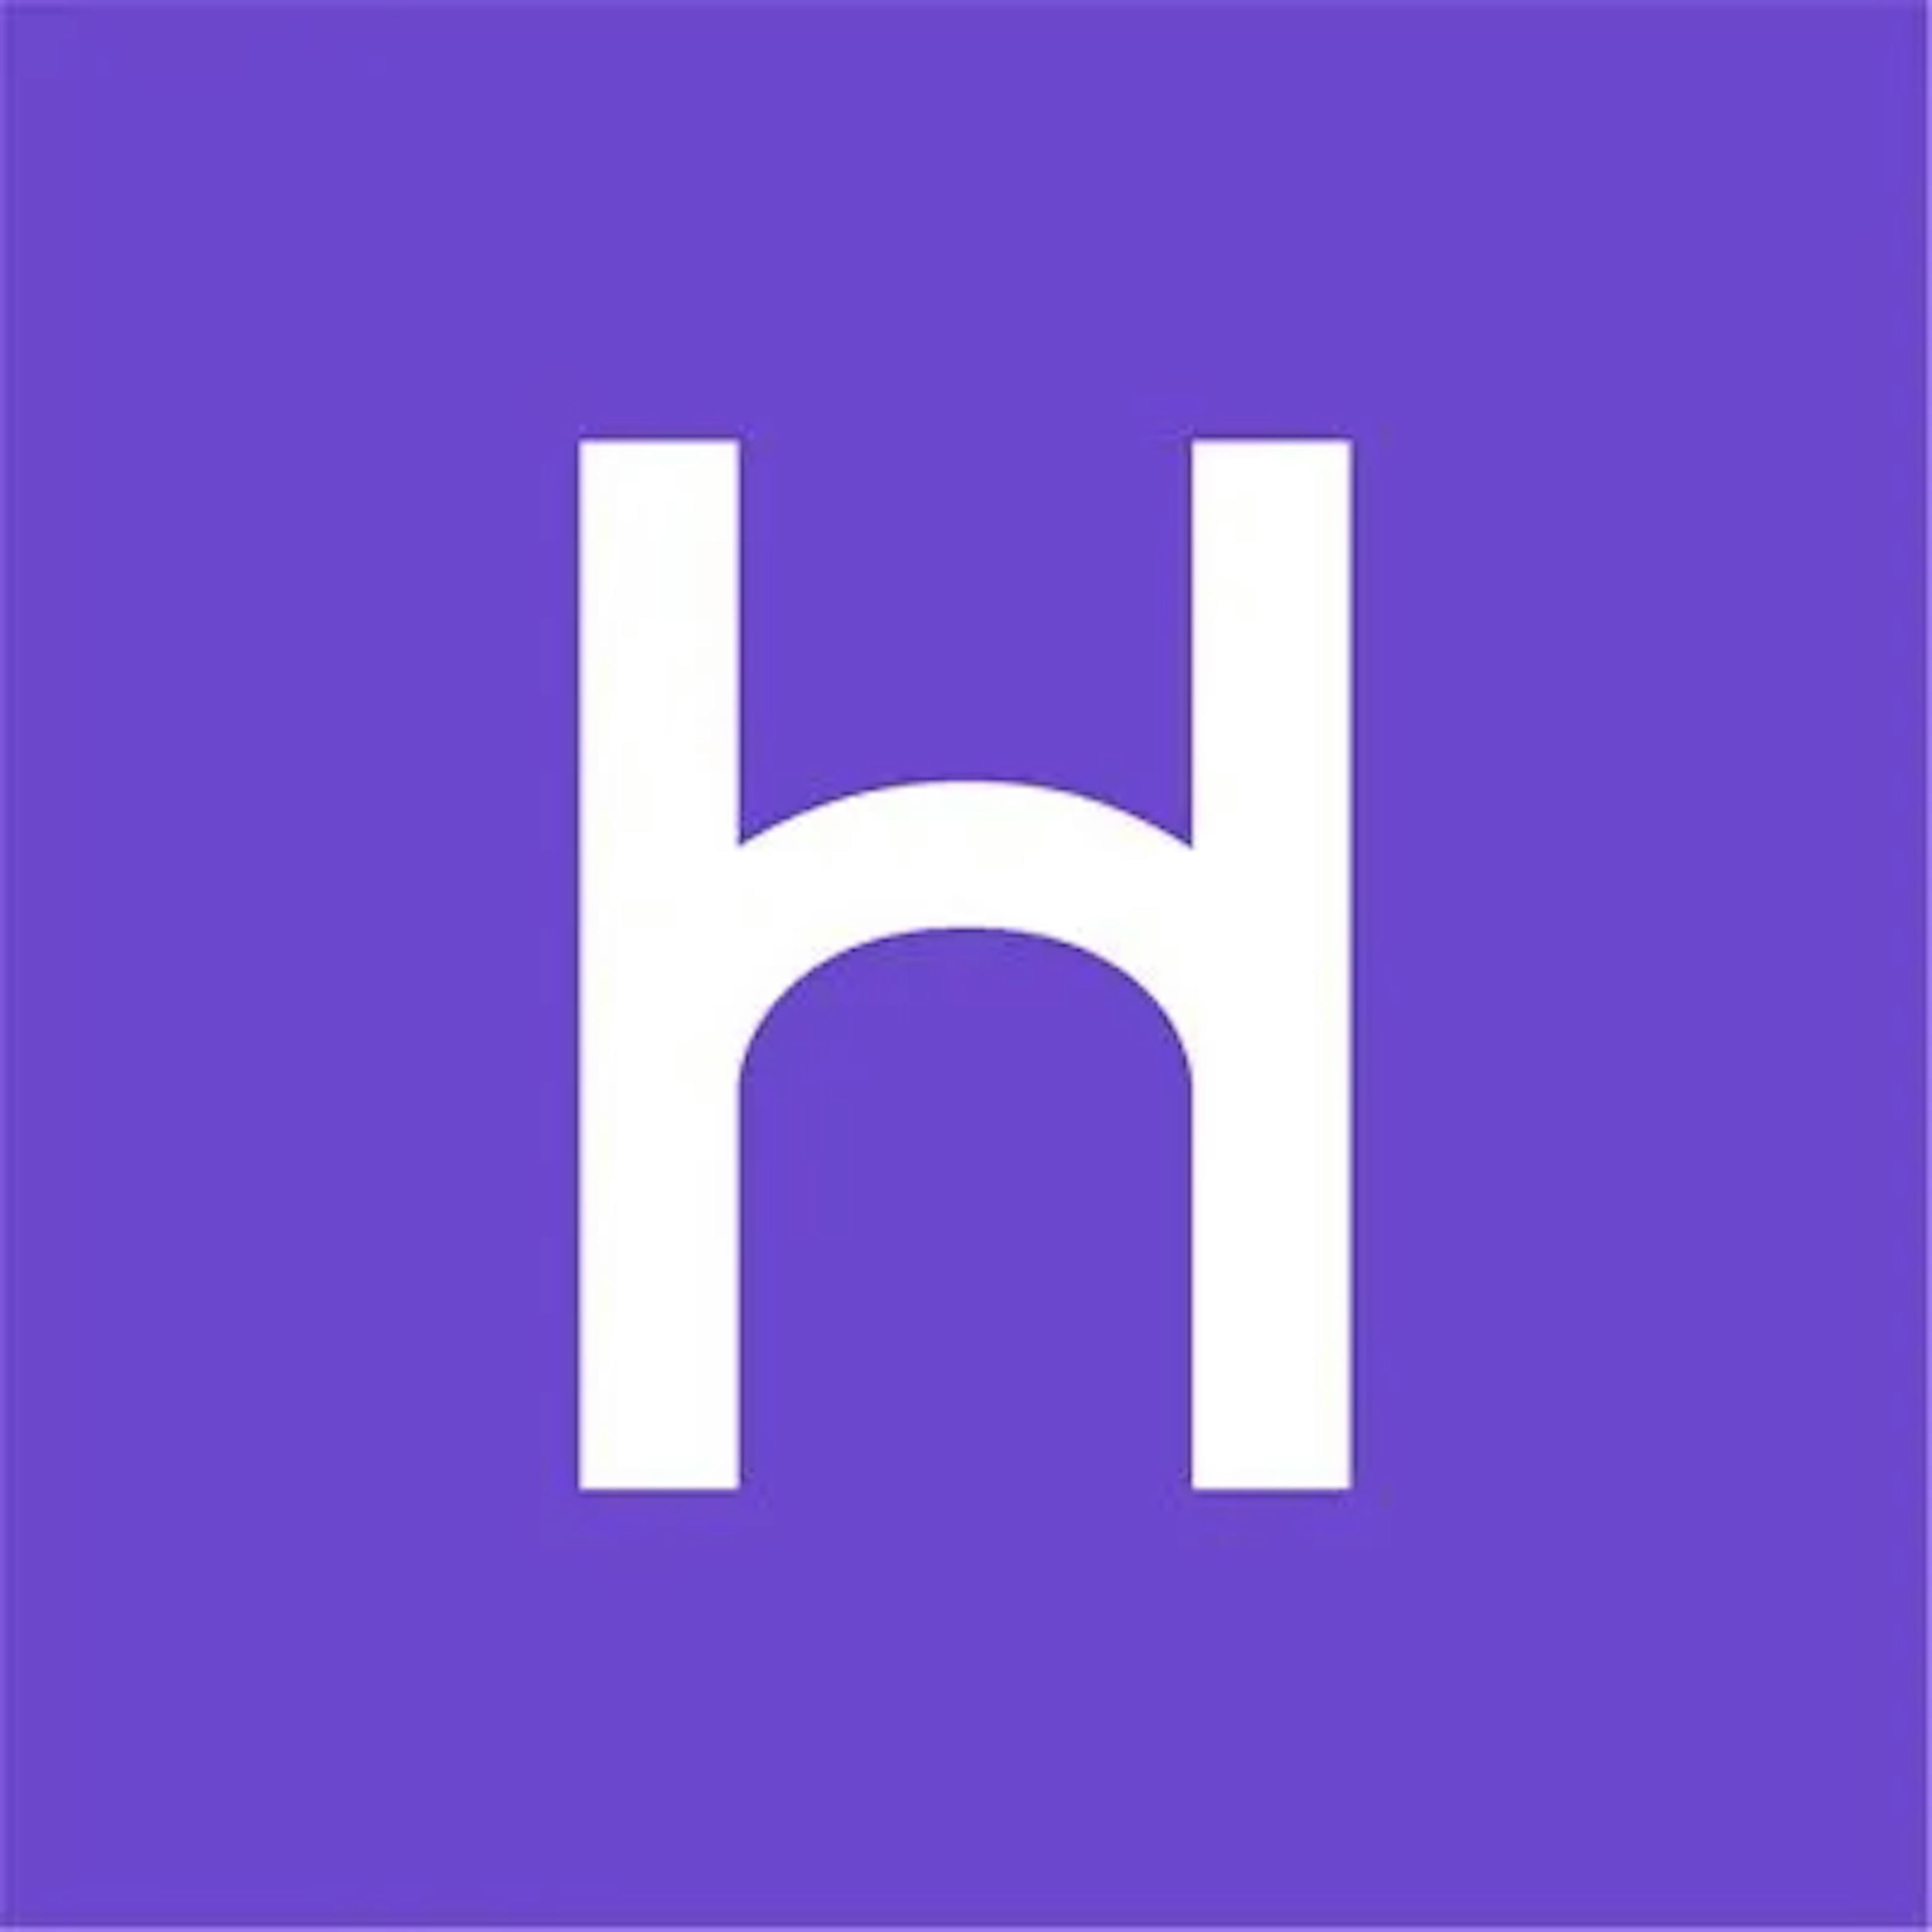 Howspace HackerNoon profile picture